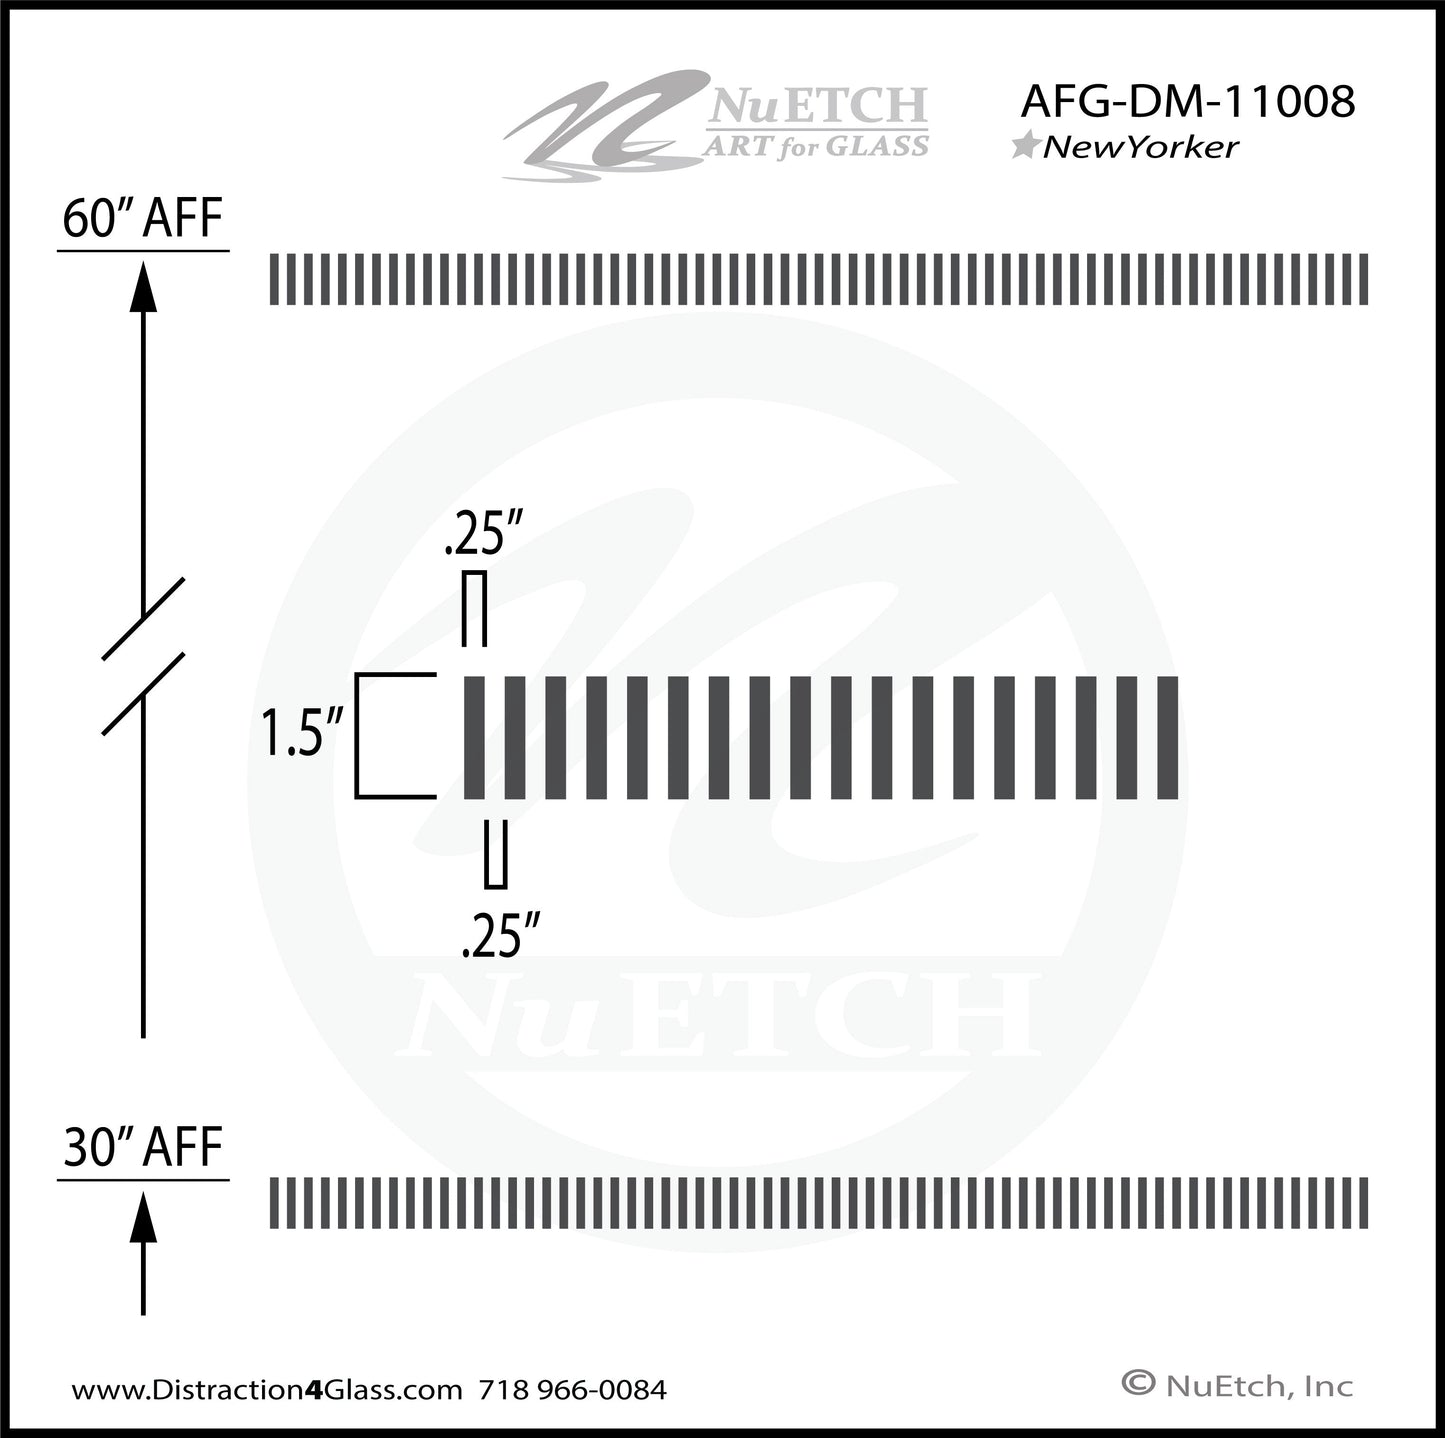 Easy to install New Yorker Style Distraction Marker Strip - Designed to Meet Safety Codes for Glass. Evenly spaced .25" W by 1.5″ H rectangles spaced .25" apart. Each strip marks a single 46″ row. Can be installed with Wet or Dry installation techniques.